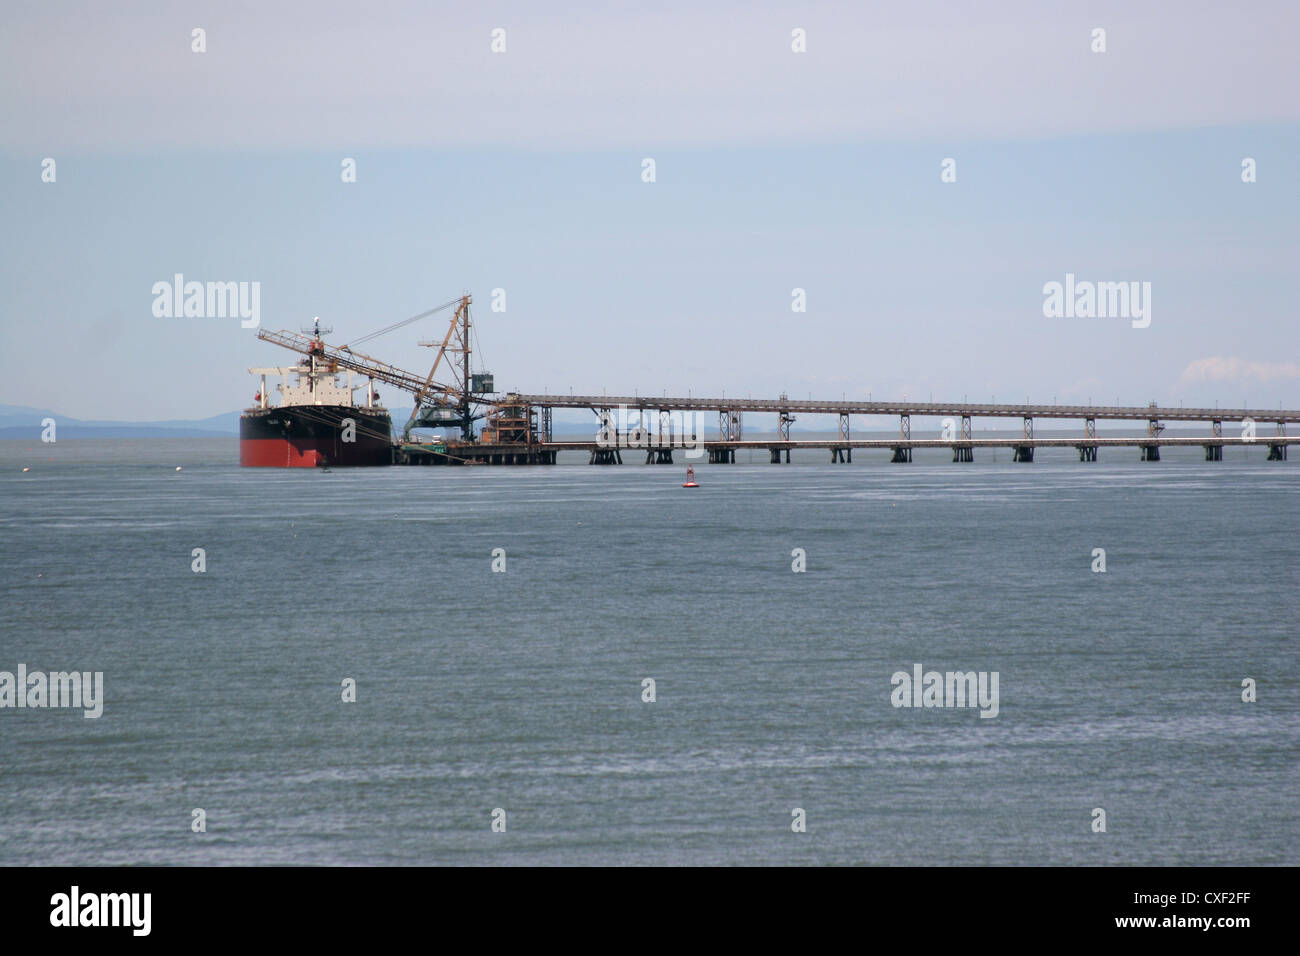 Container ship moored on dock Stock Photo